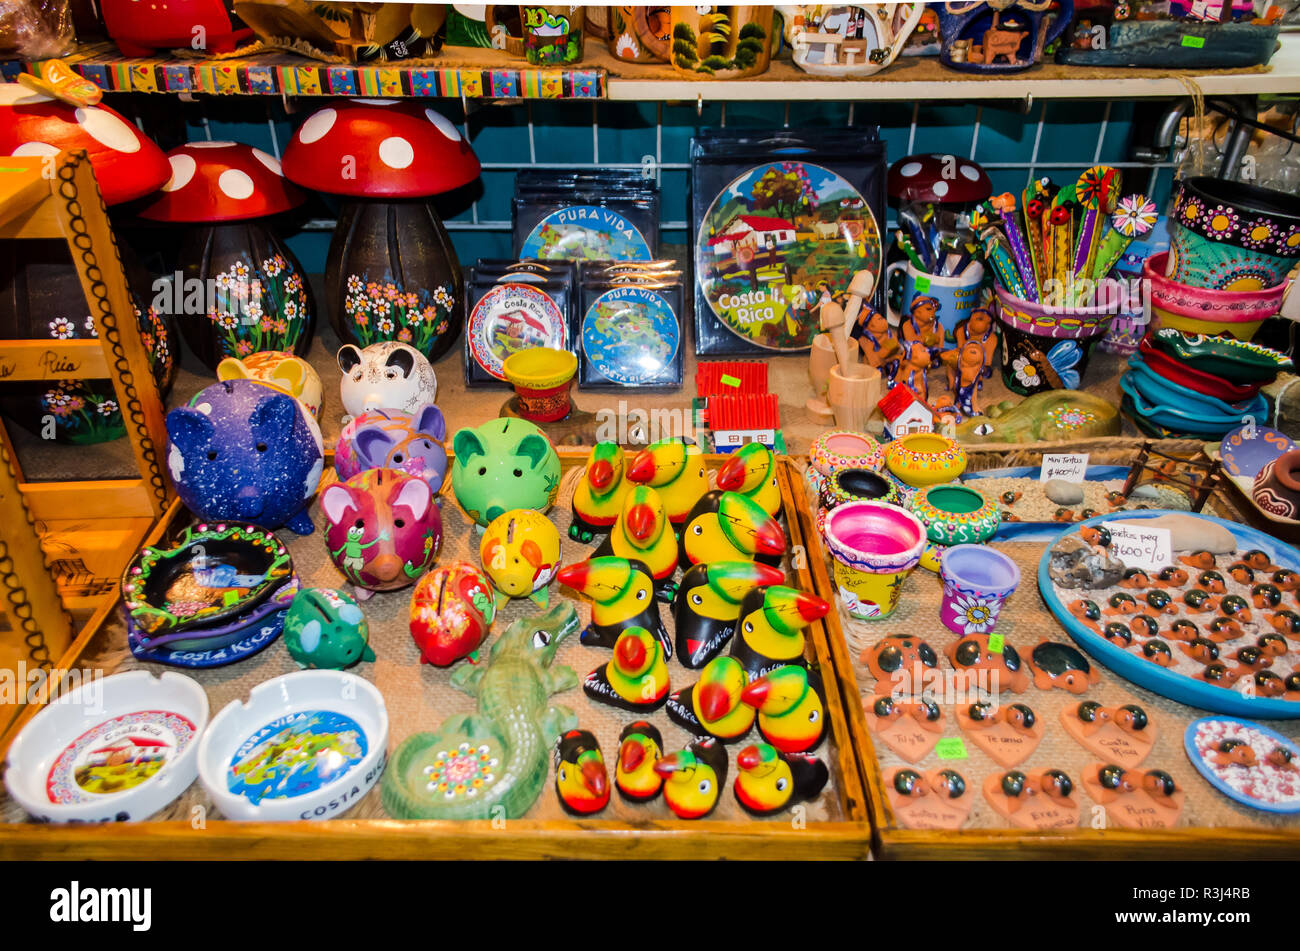 Costa Rica souvenirs for sale in the Central Market of San Jose. Stock Photo